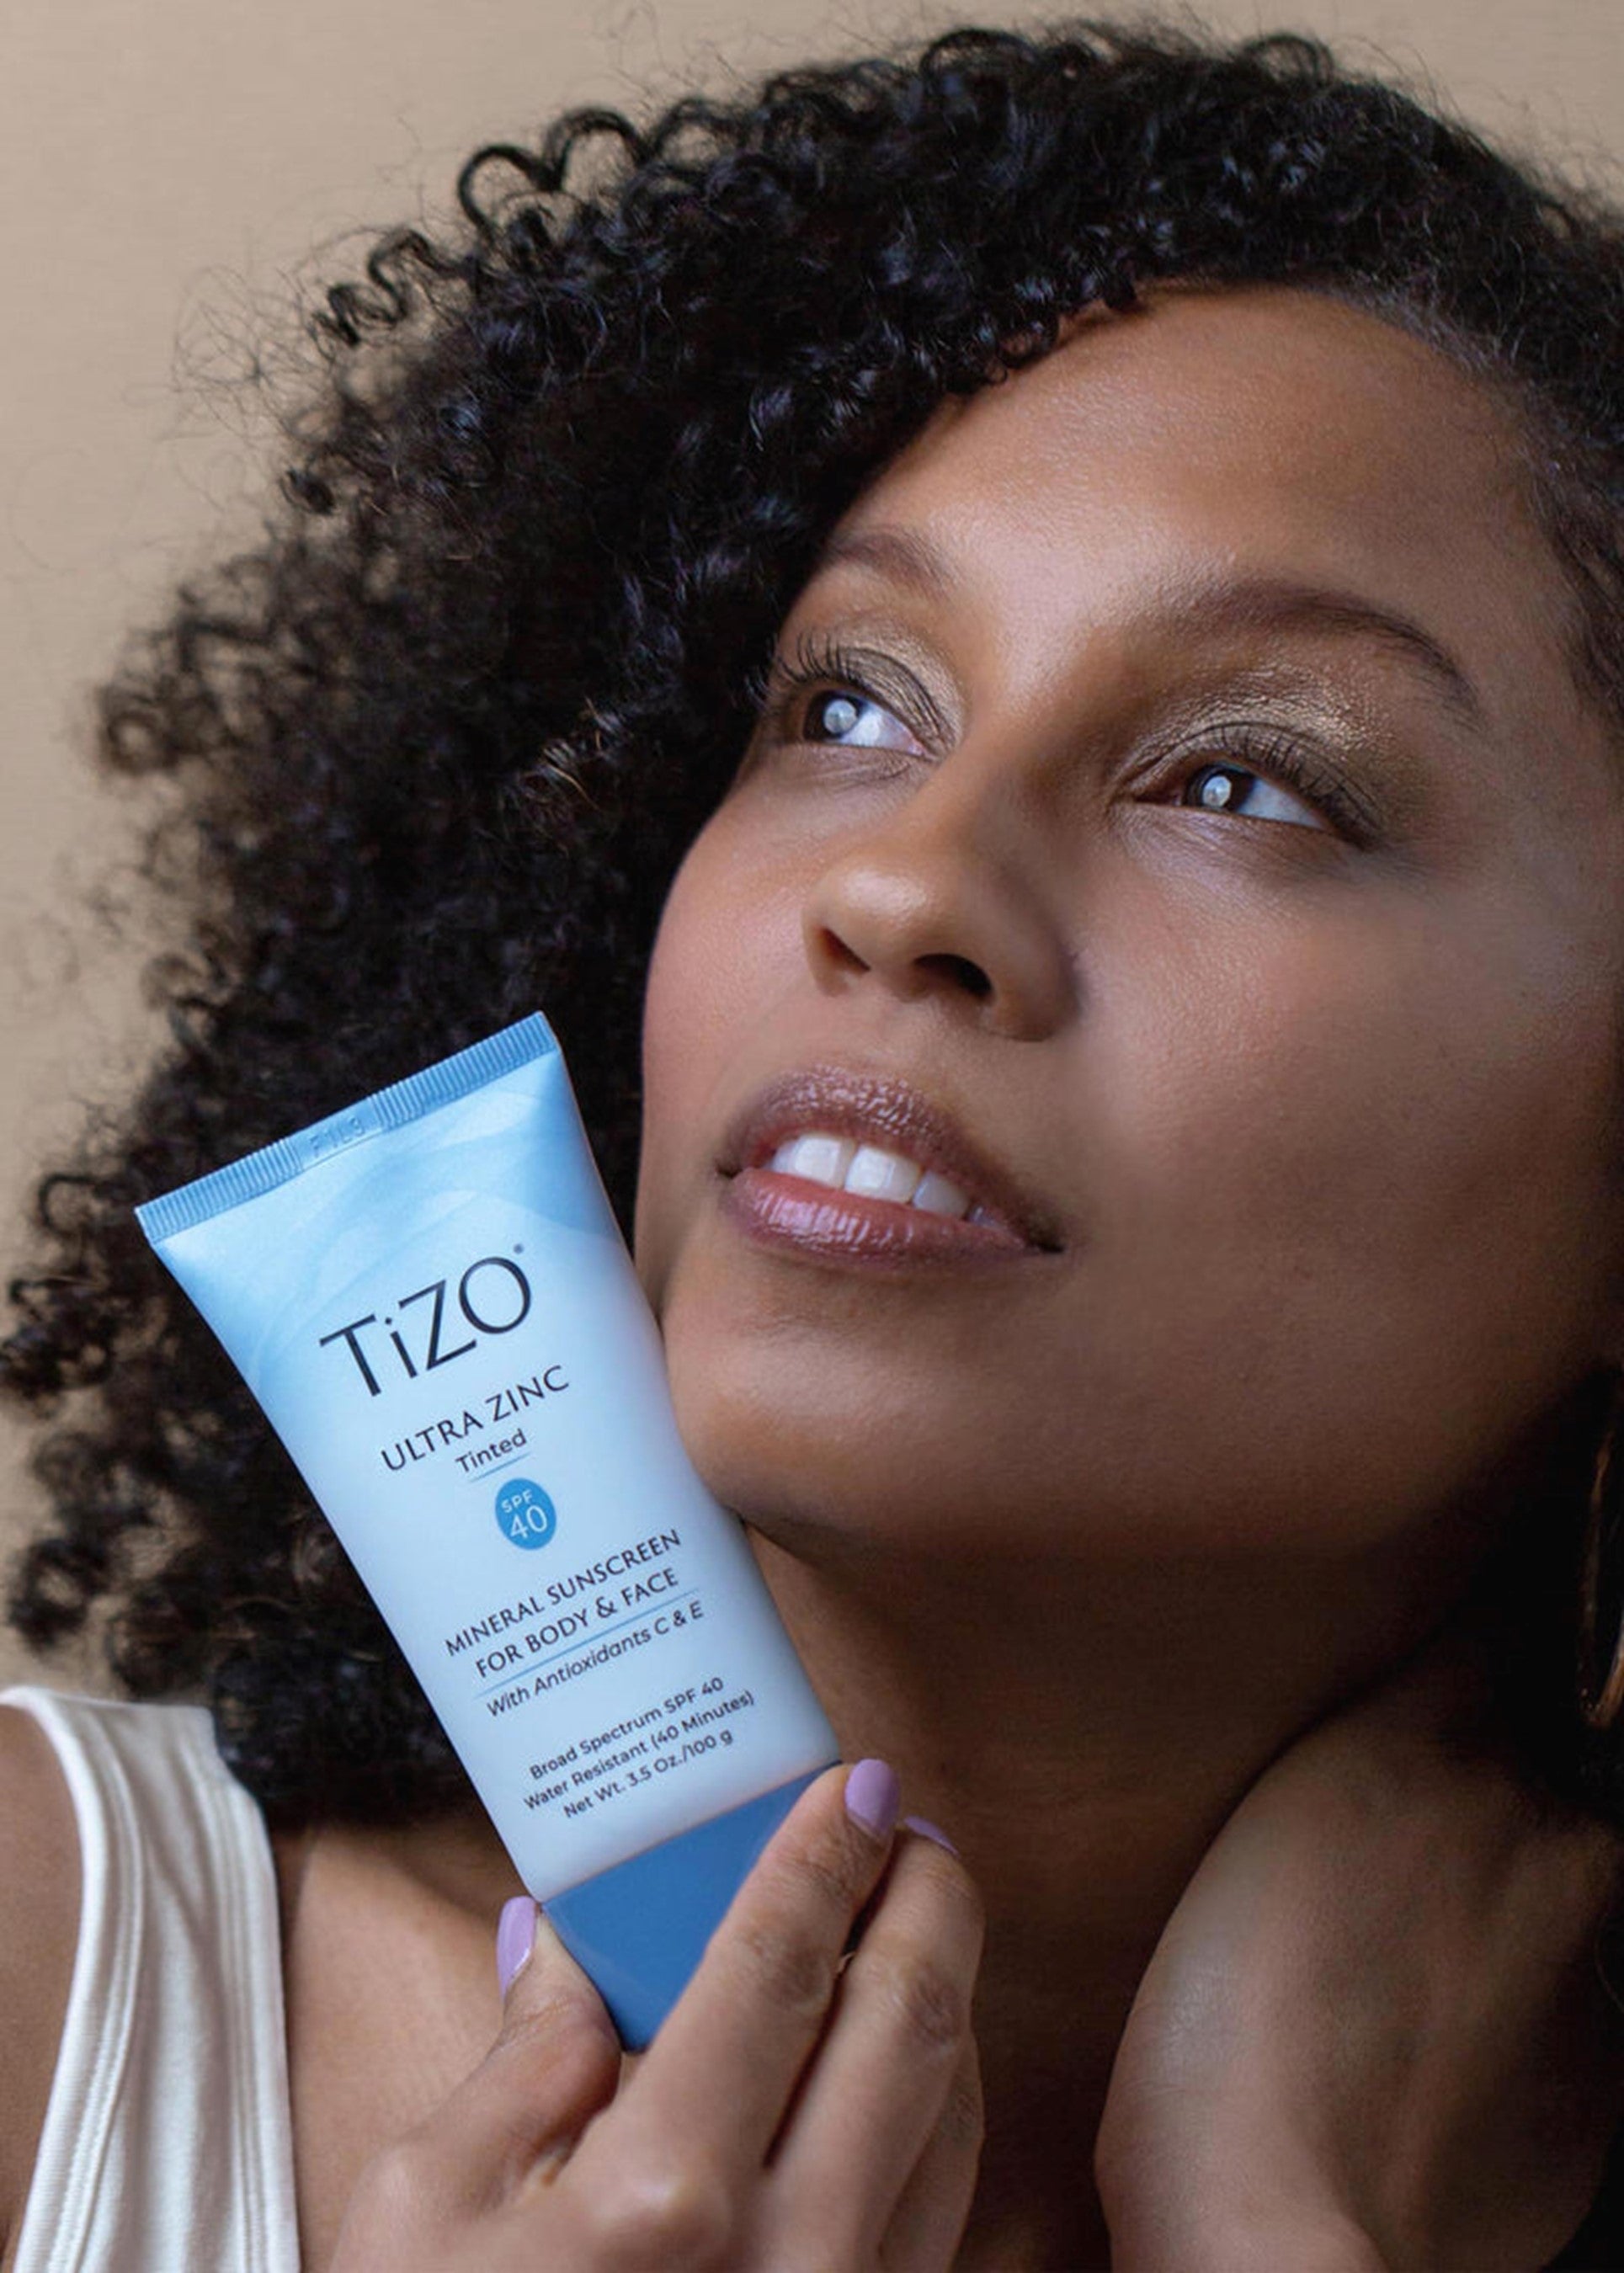 Ultra Zinc Body & Face Tinted SPF 40 with model